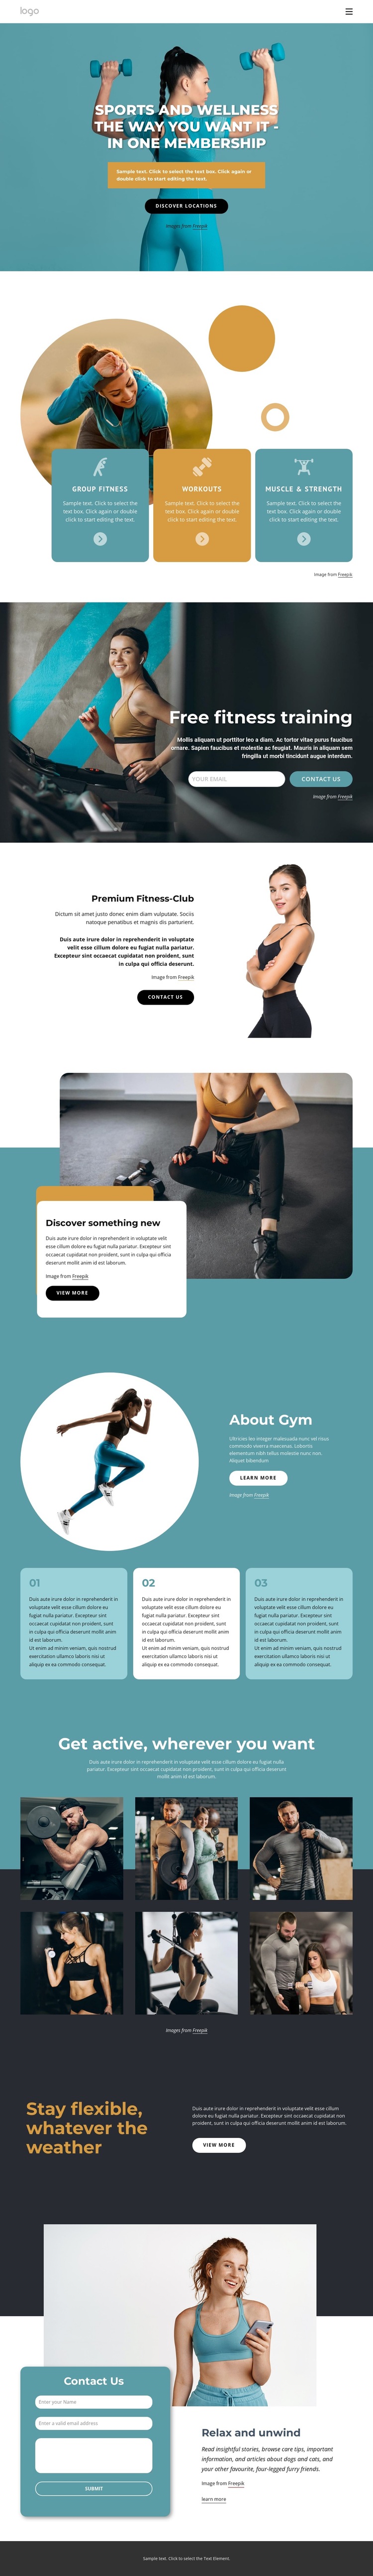 Workout anywhere with one membership HTML5 Template